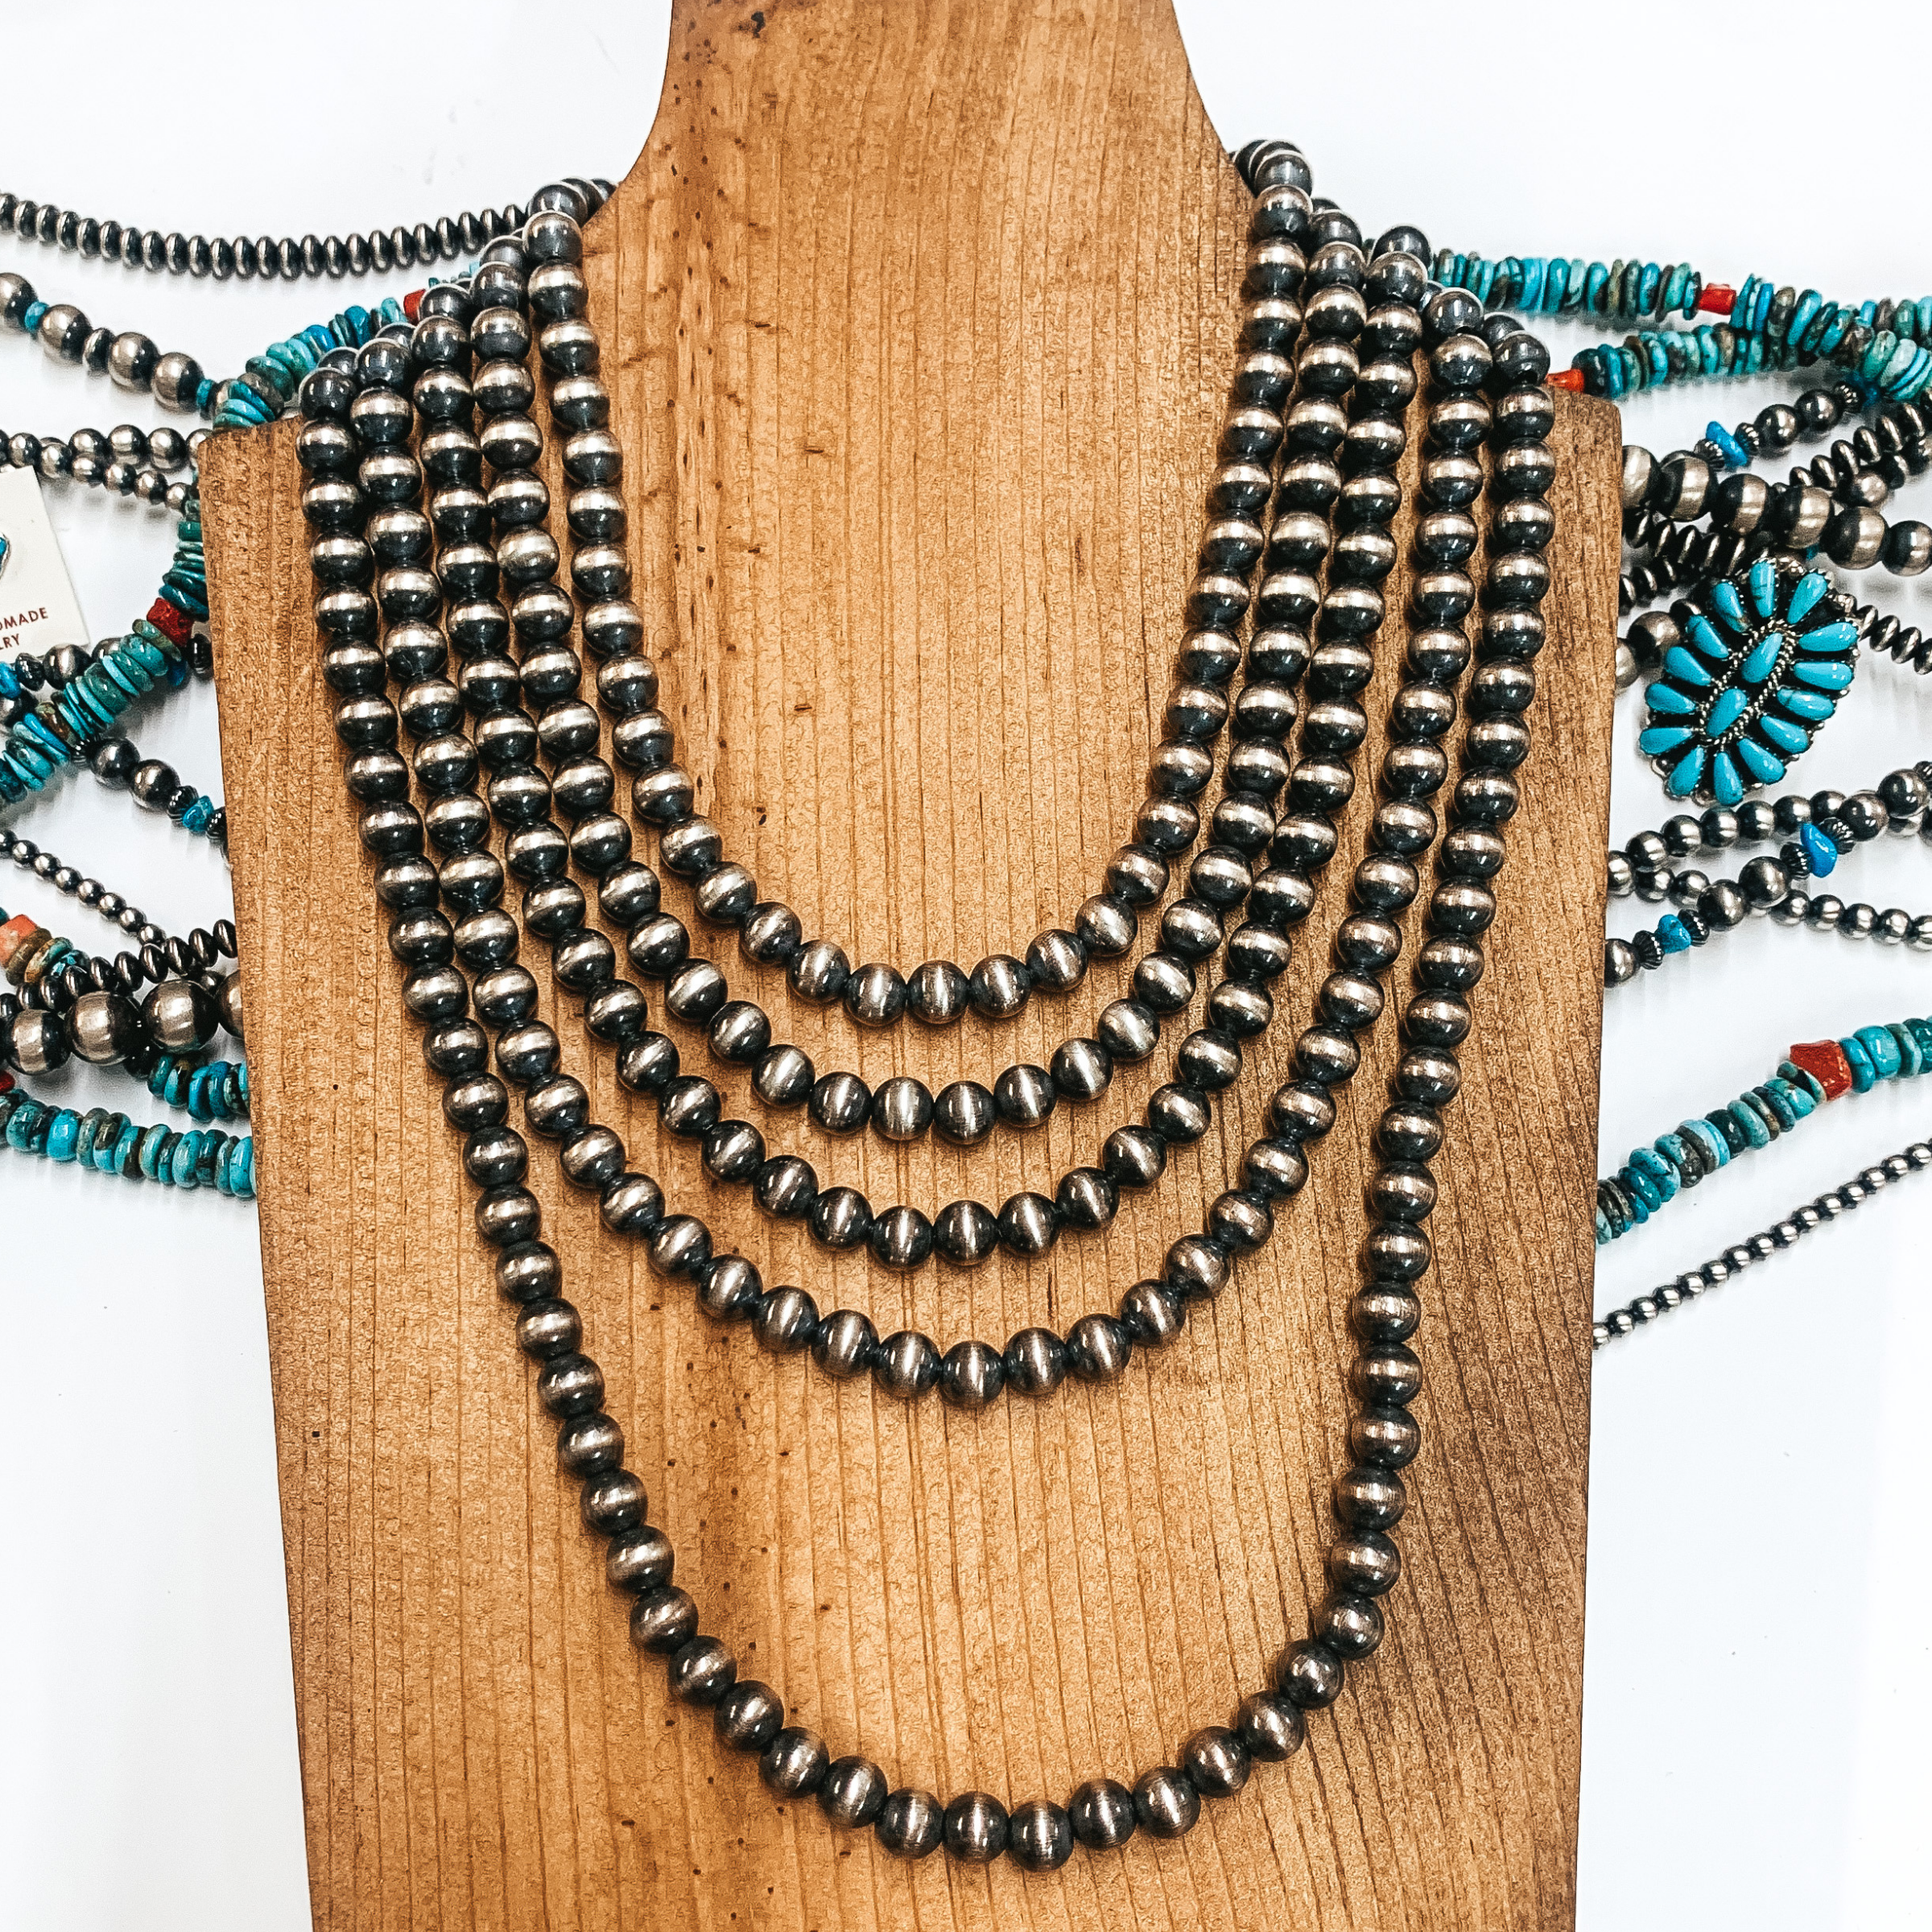 Navajo | Navajo Handmade 8mm Navajo Pearls Necklace | Varying Lengths - Giddy Up Glamour Boutique